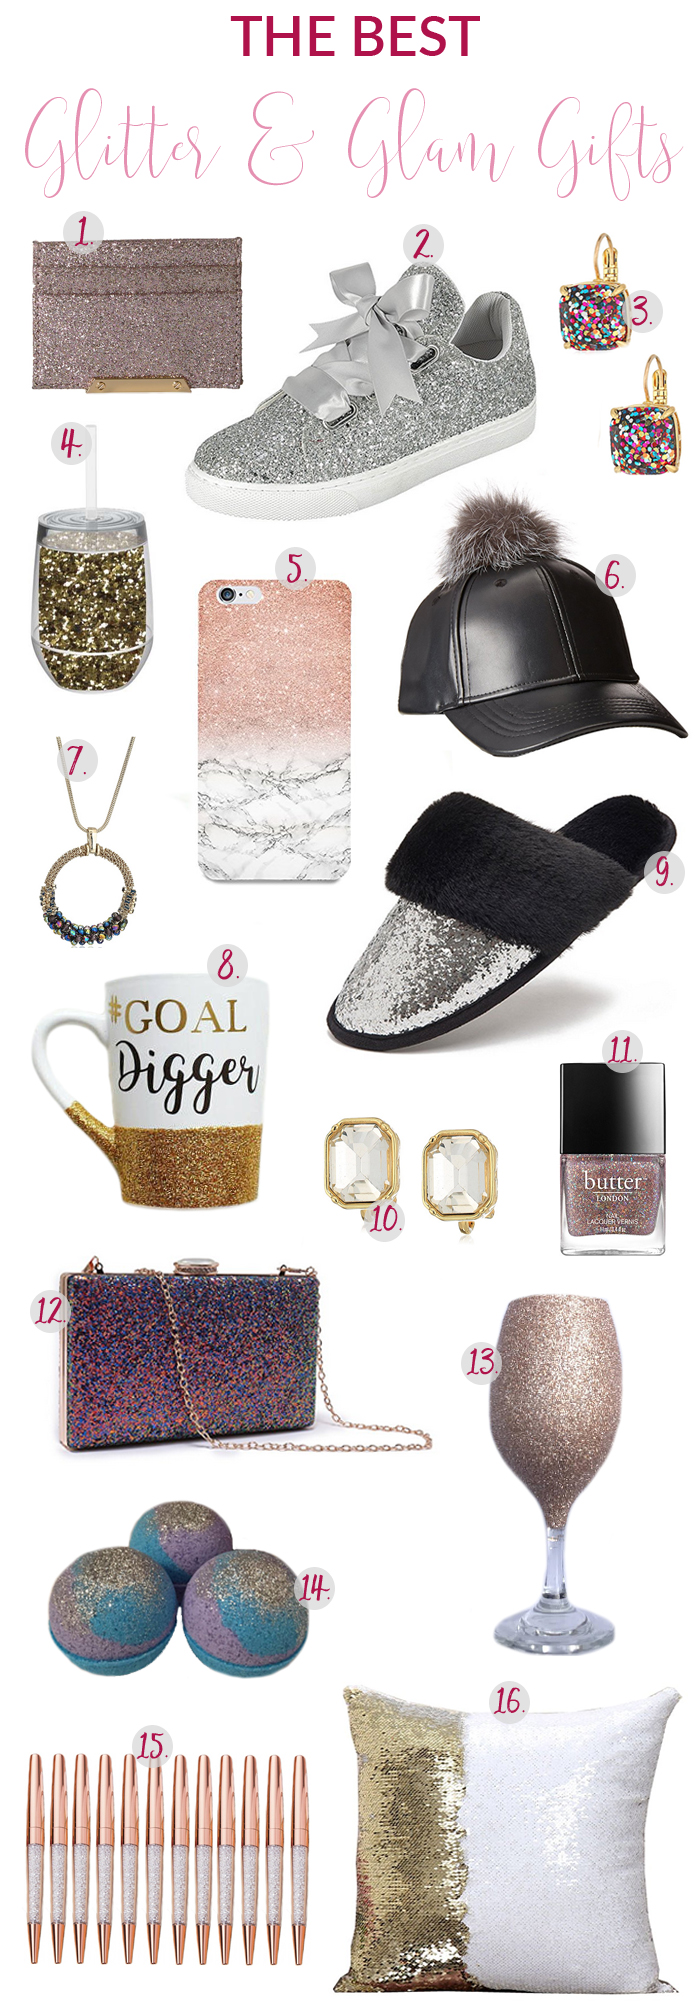 16 amazing glitter and glam gift ideas for the girl that loves the luxe/glam/glittery life!